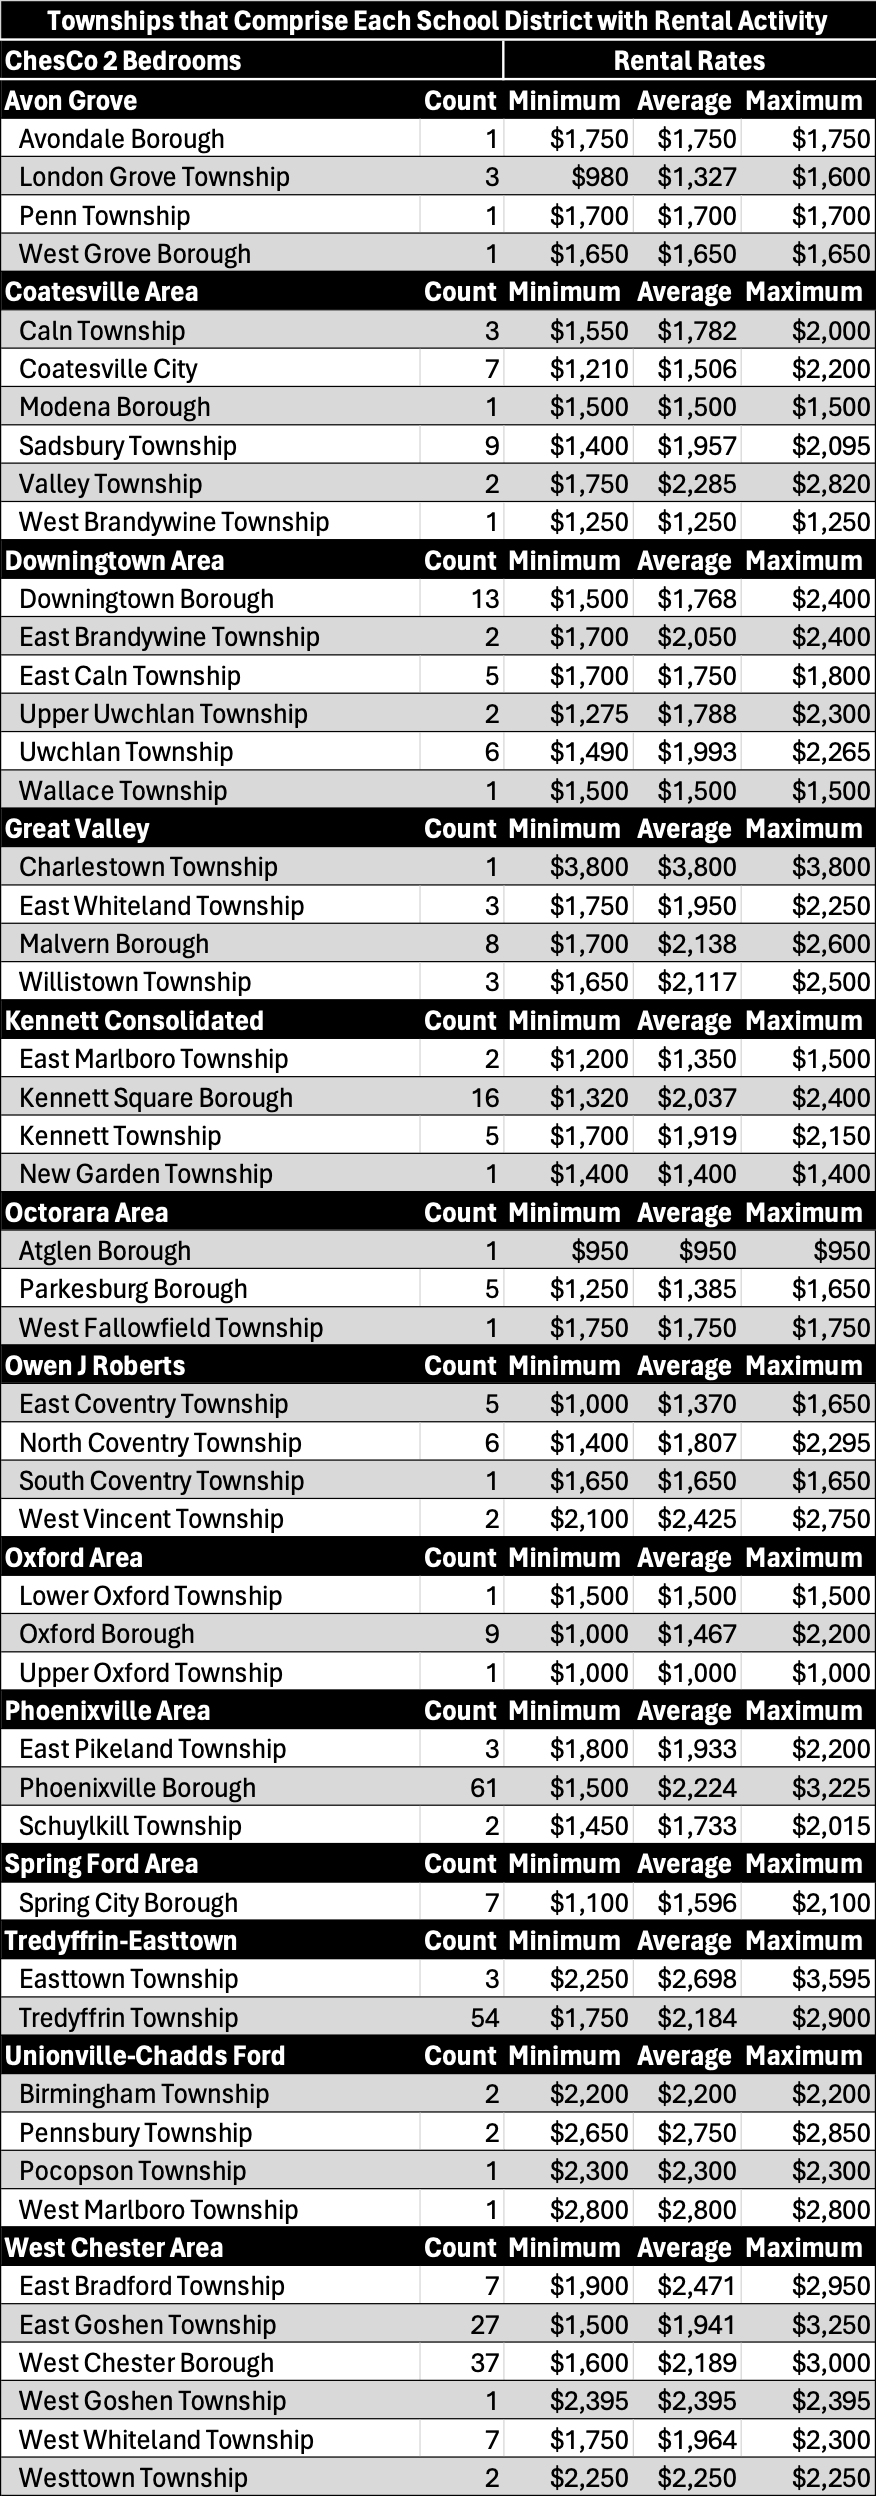 A table of each township within each School District in Chester County, PA for studios and 2 bedrooms, which includes the number of transactions and each township's corresponding rent prices displayed as minimum, average and maximum. 